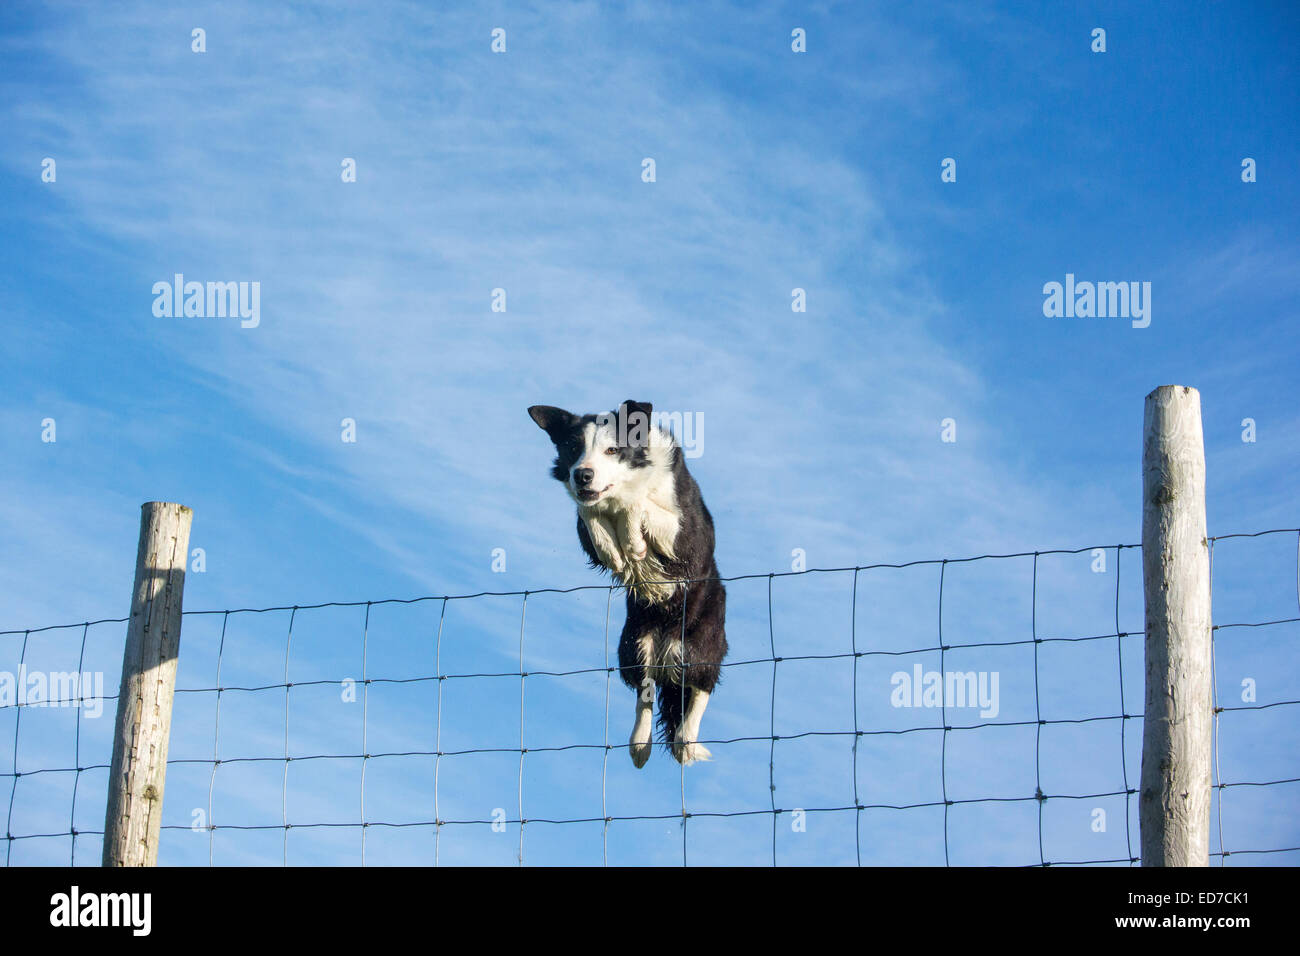 Image result for Sheepdog jumping a fence